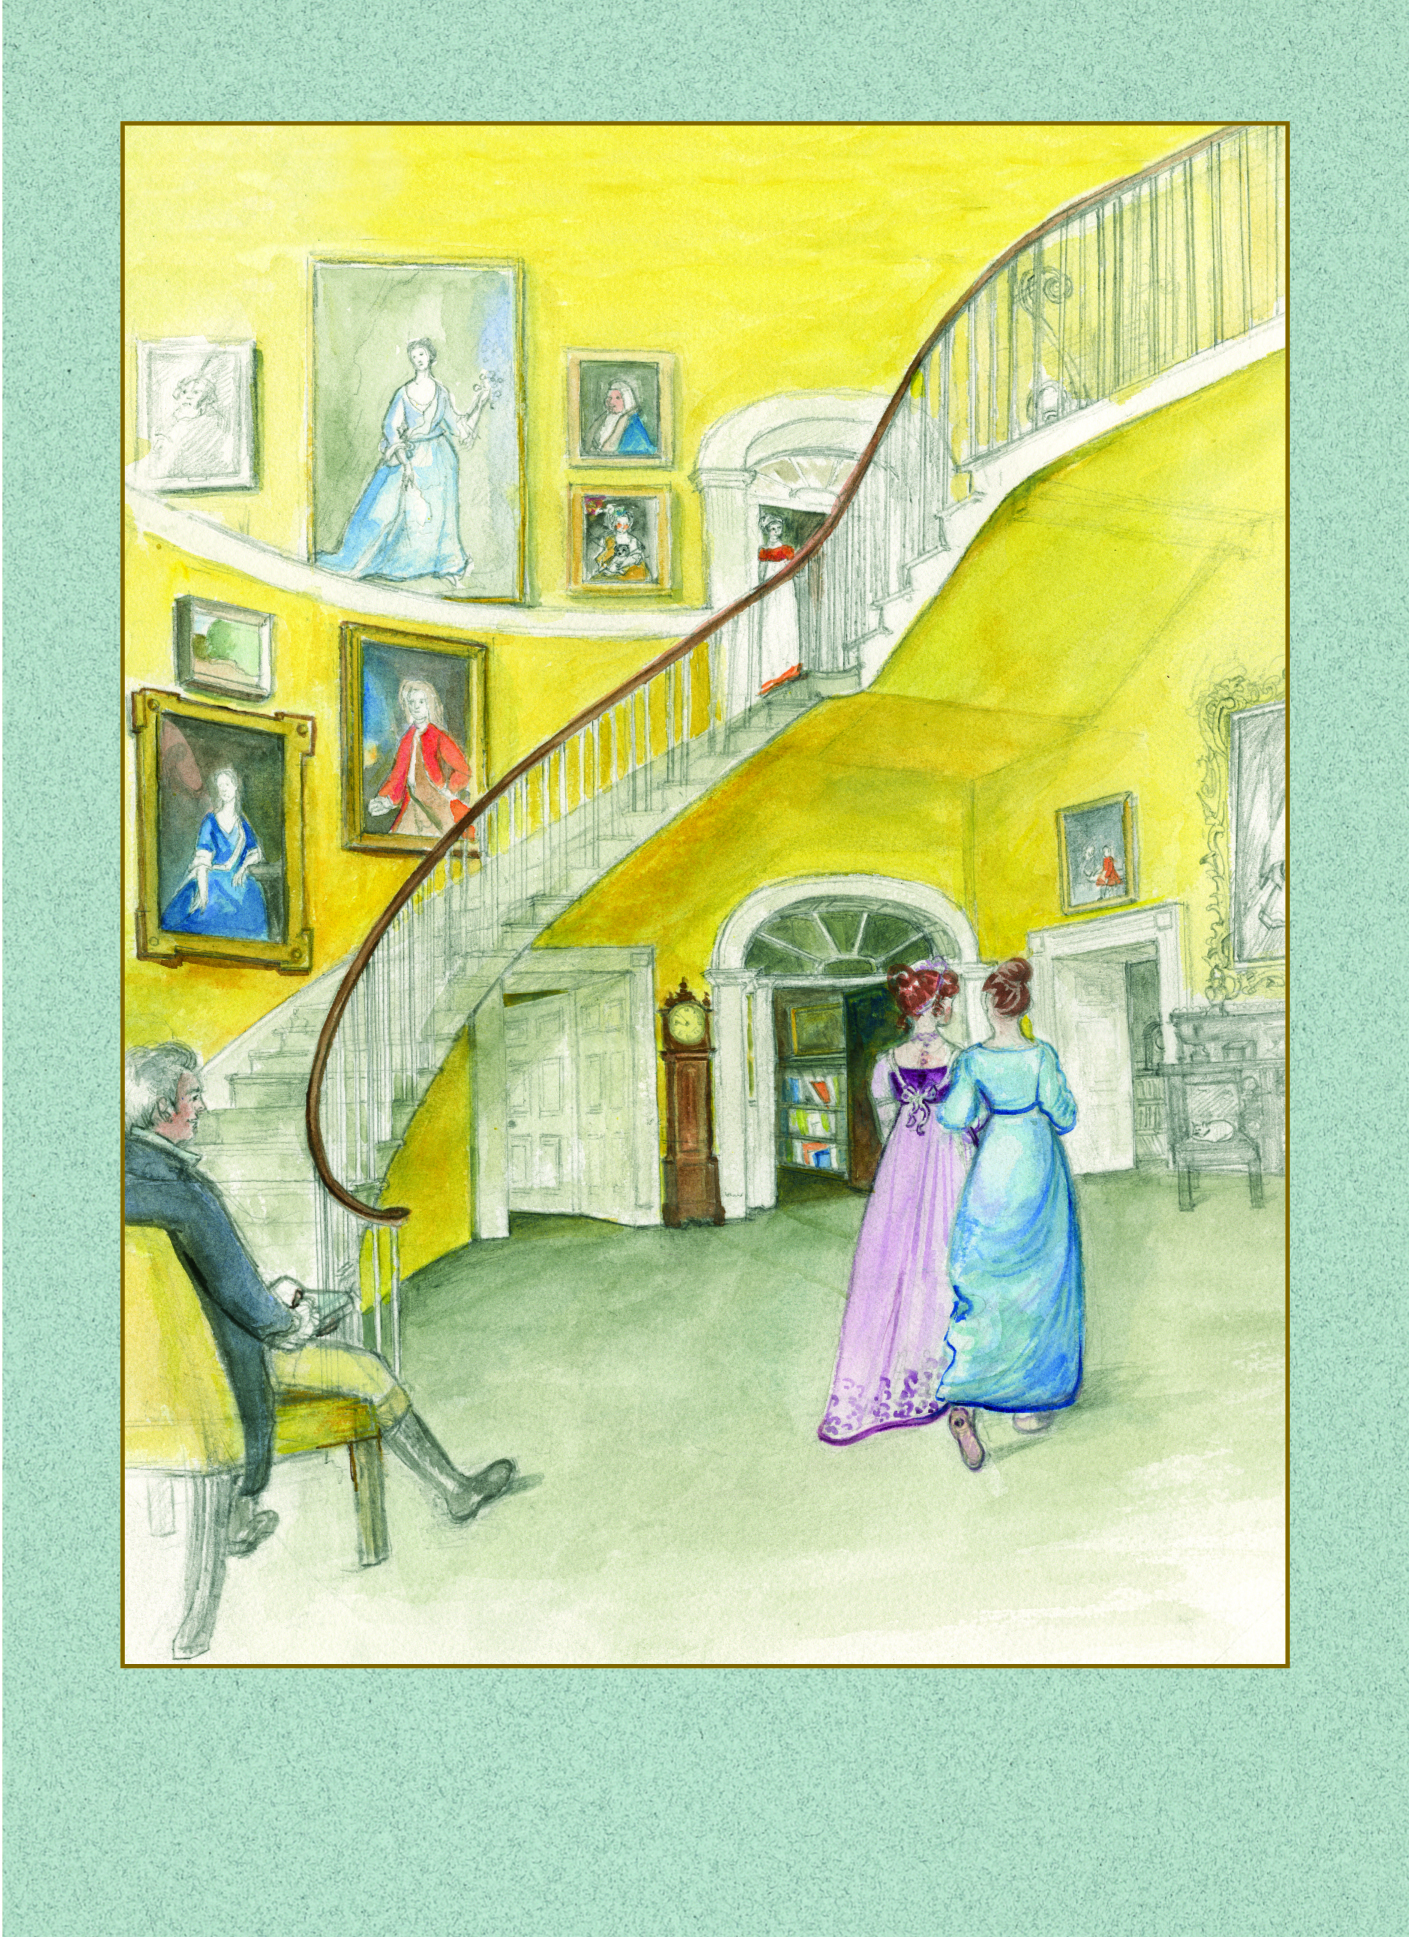 My Darcy was directly invited  - Jane Austen card on sale at Winchester Cathedral gift shop.